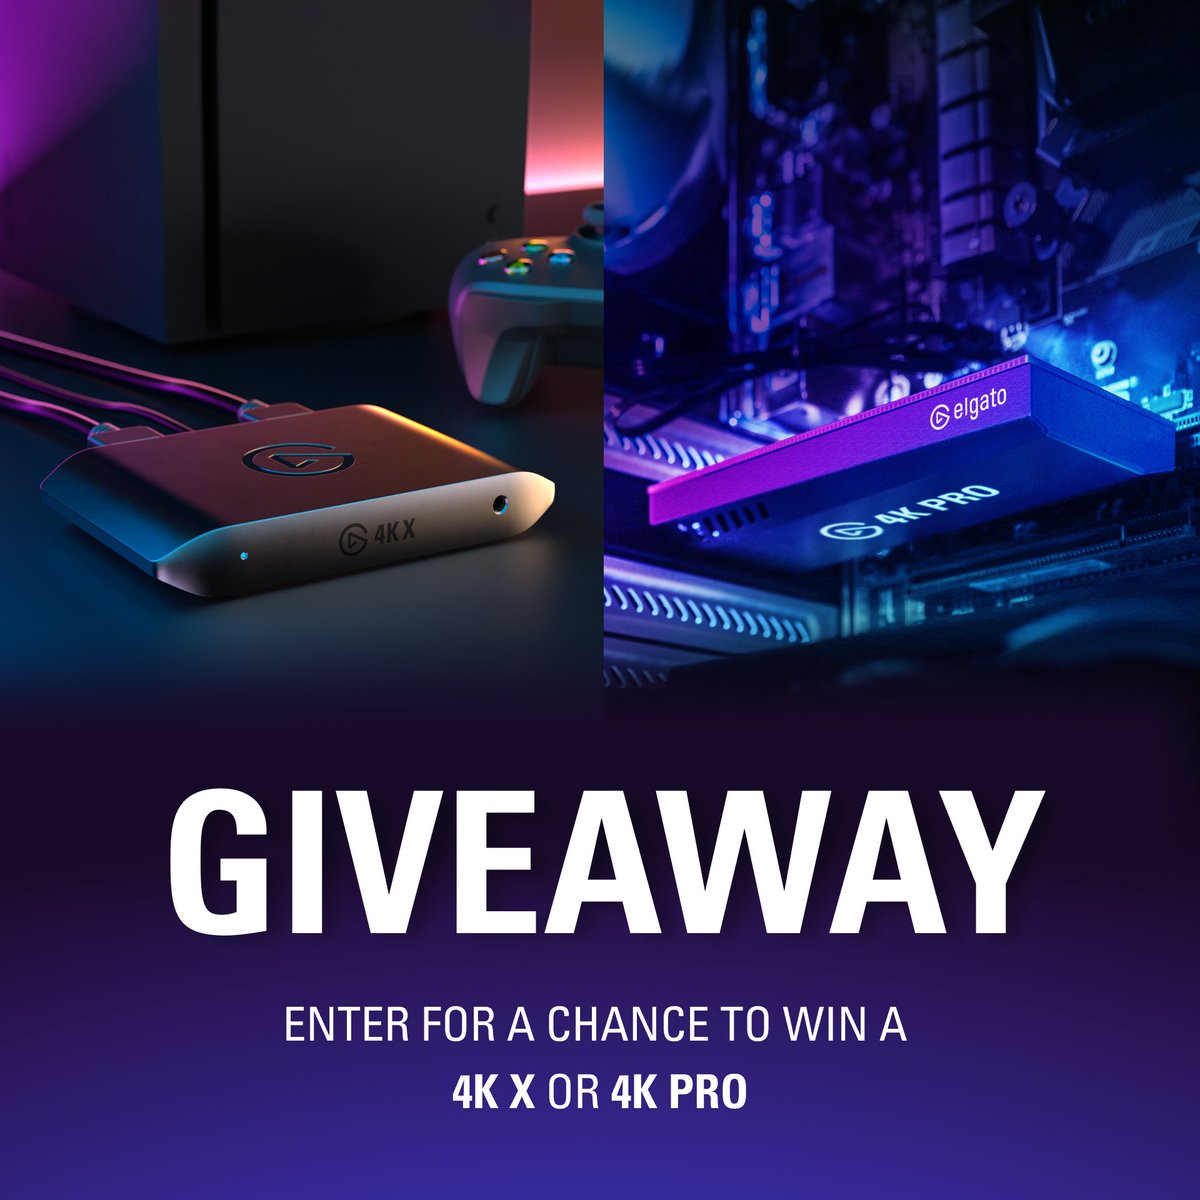 🎉 GIVEAWAY 🎉 To celebrate the launch of our new capture cards, one lucky winner will get their choice of either 4K X or 4K Pro. To enter: 1️⃣ Follow @elgato 2️⃣ RT & ♥ Winner will be chosen February 8th.